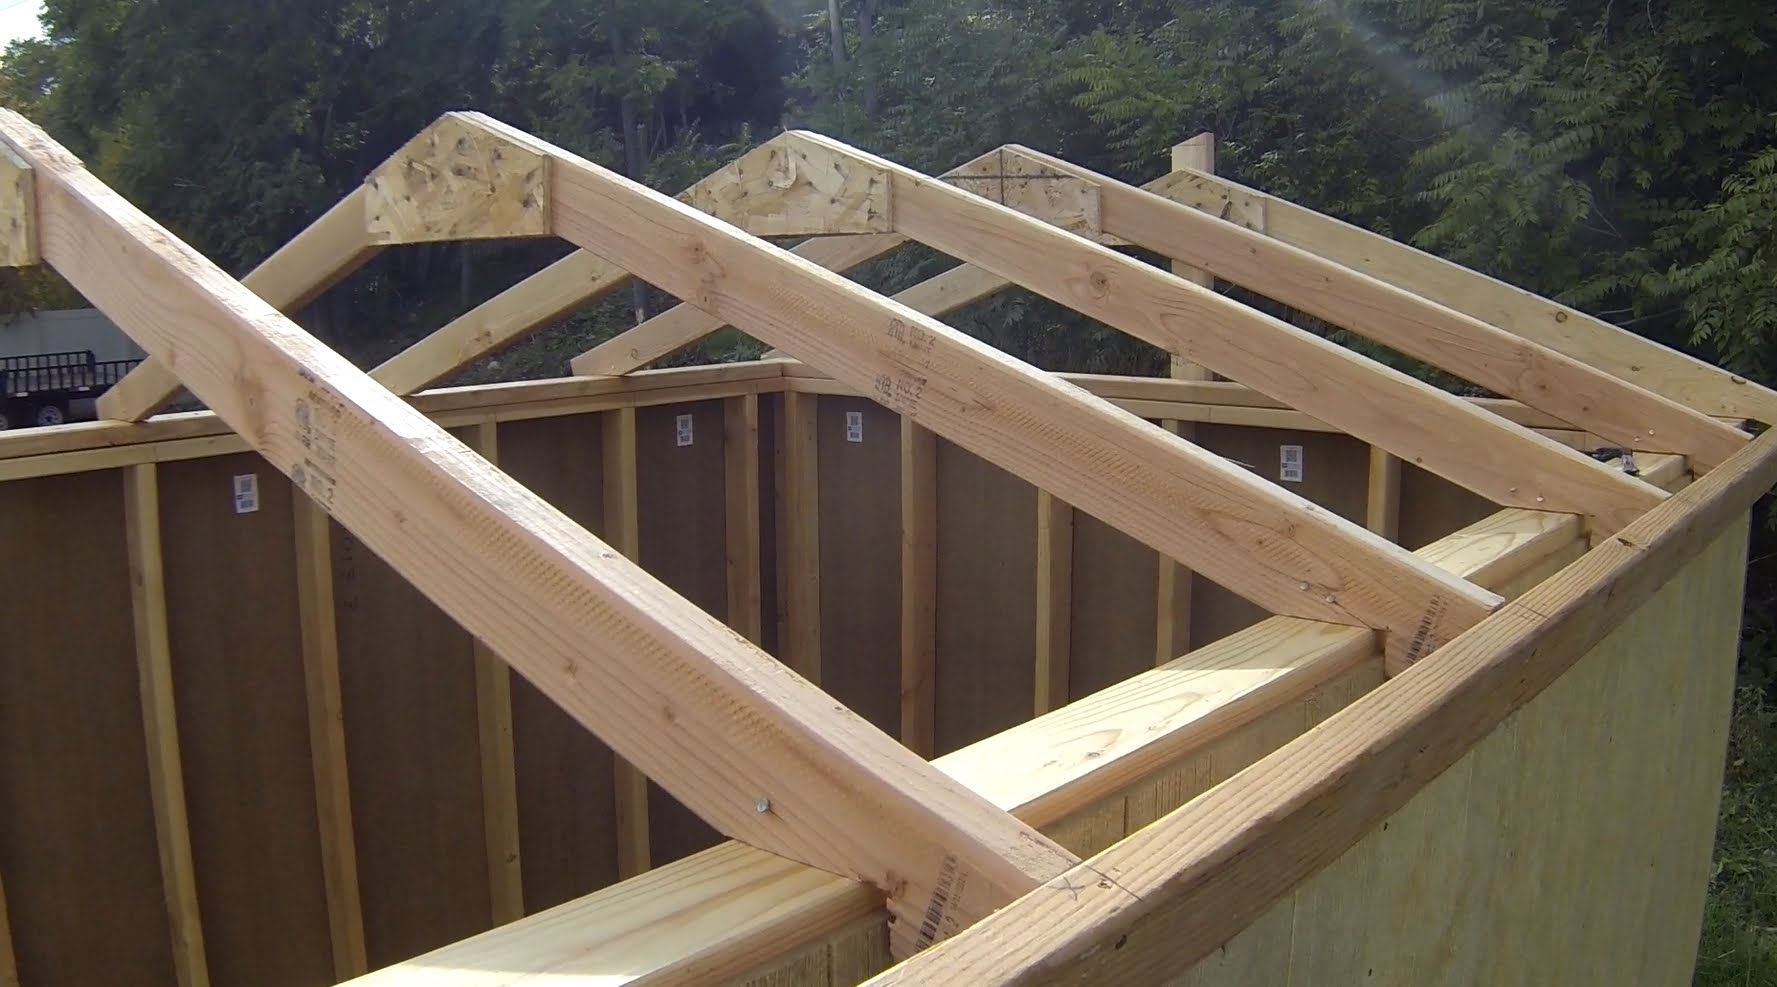 How to make simple roof truss for shed - Myrooff.com